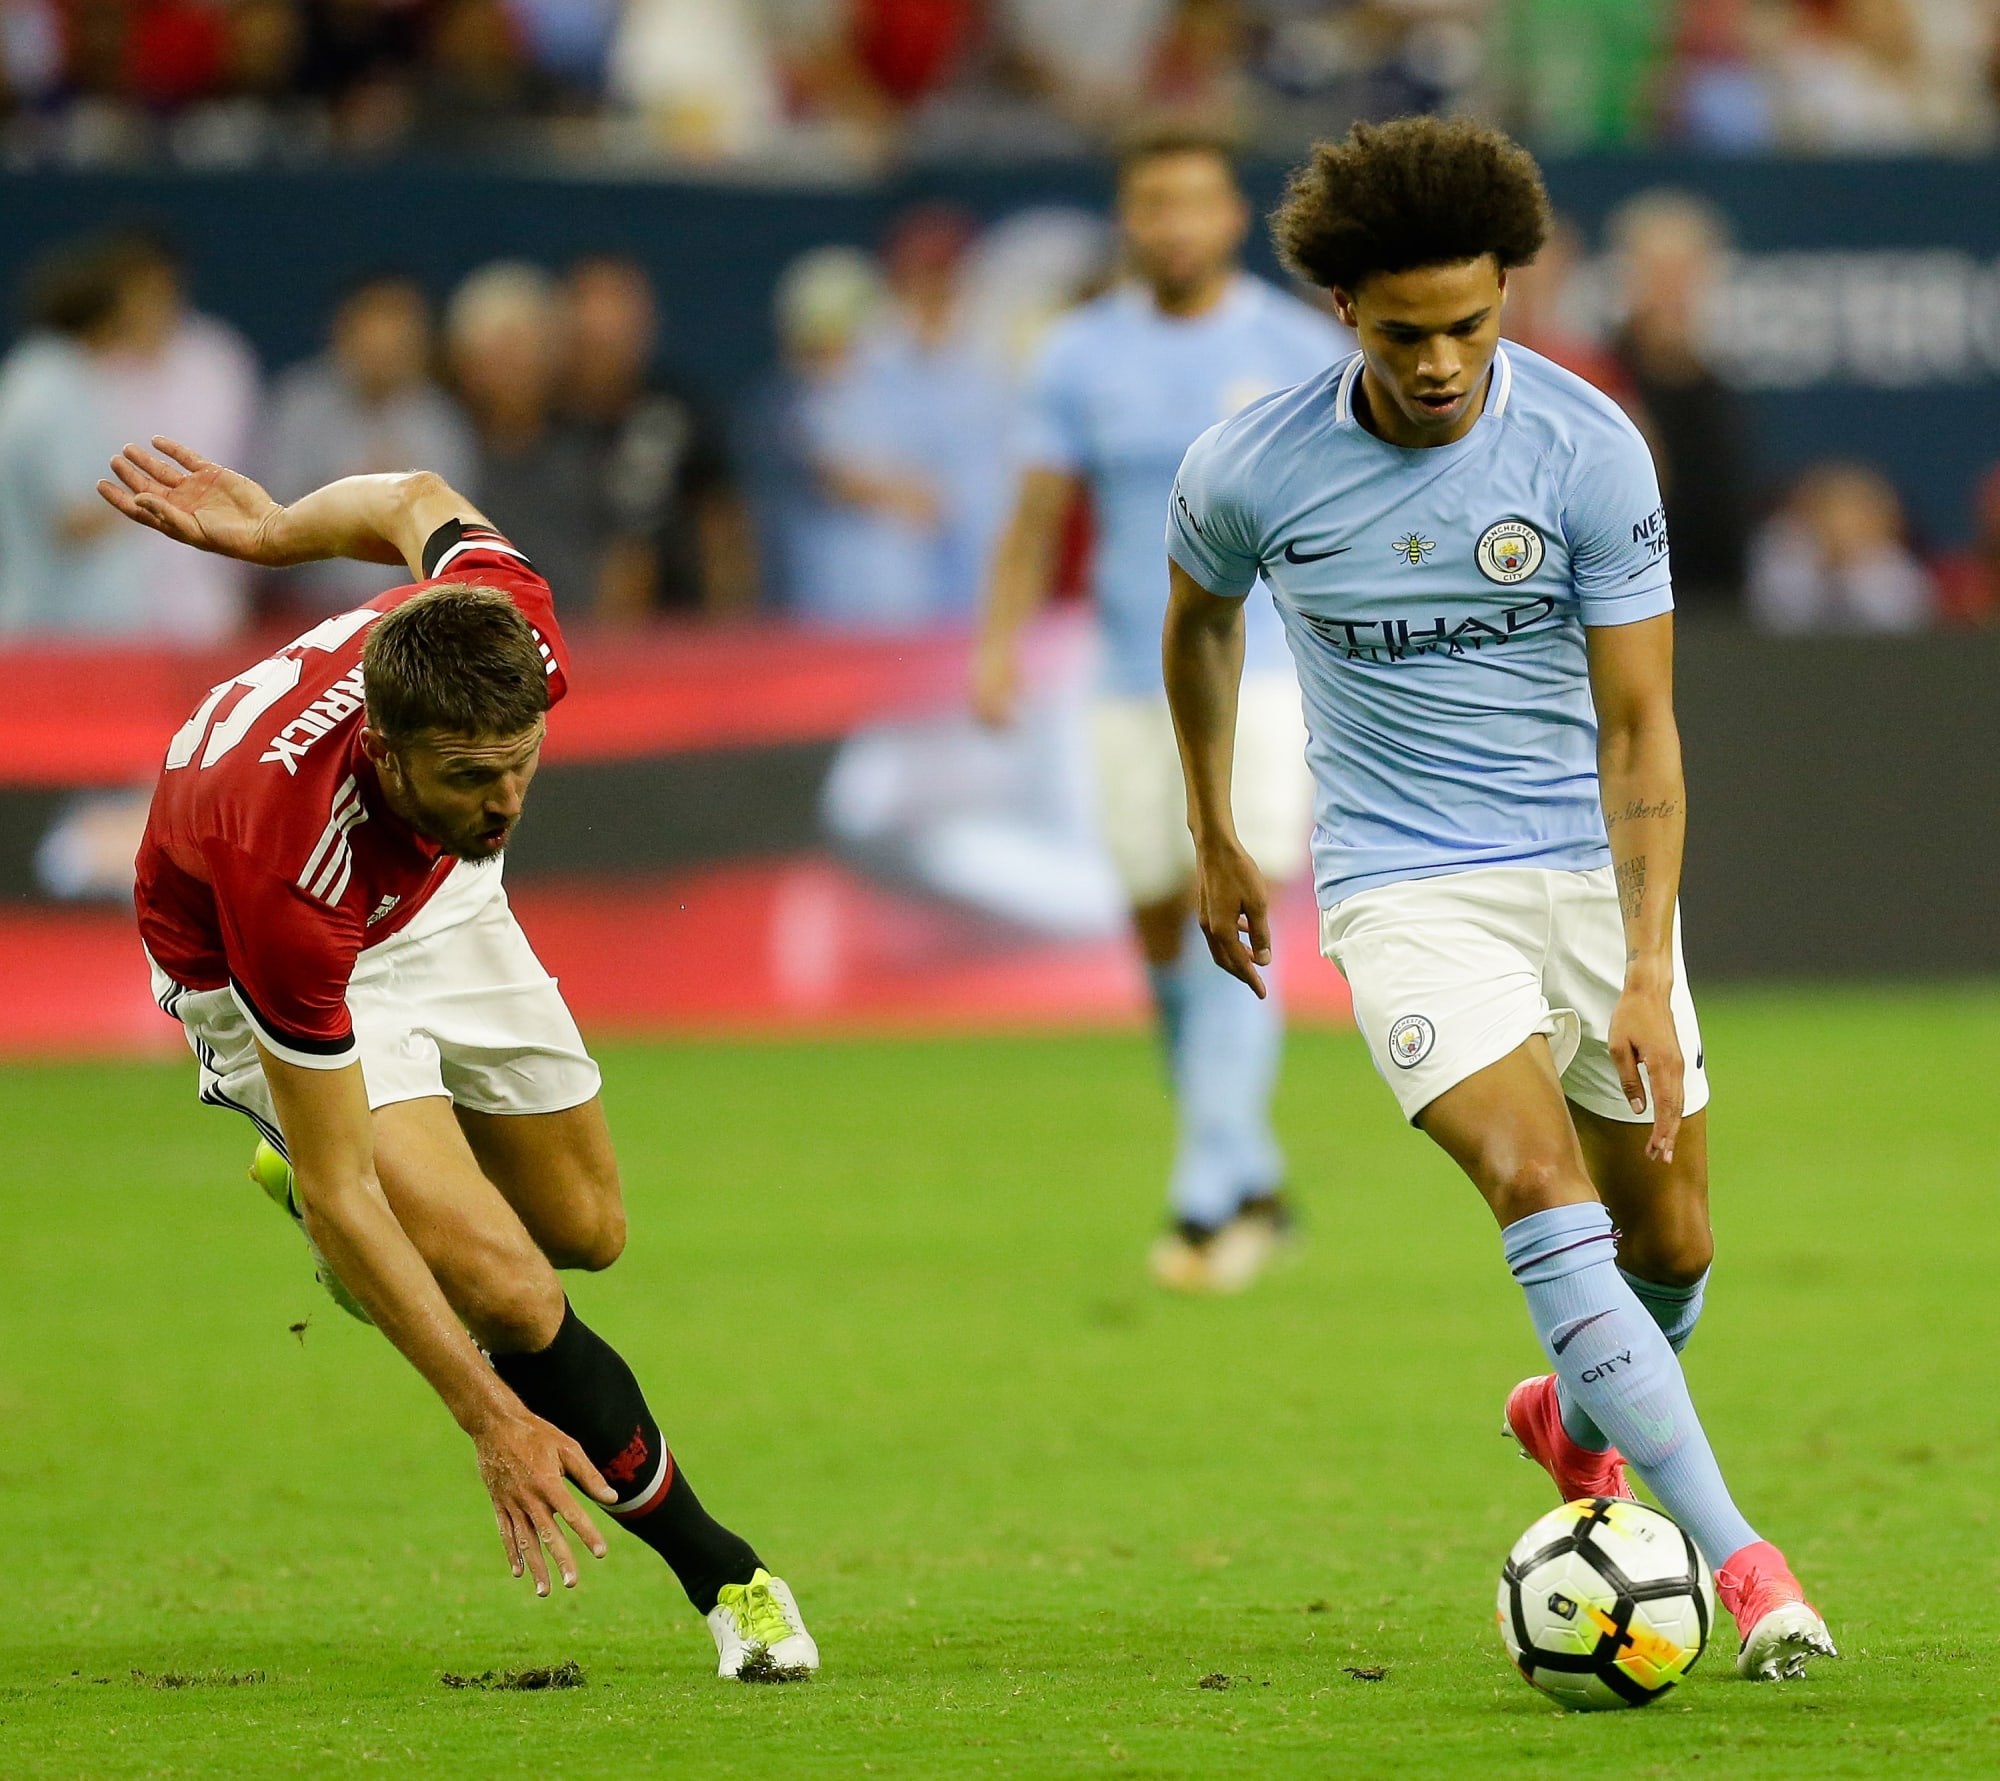 Manchester City FC 2017/18 Player Preview - Leroy Sane